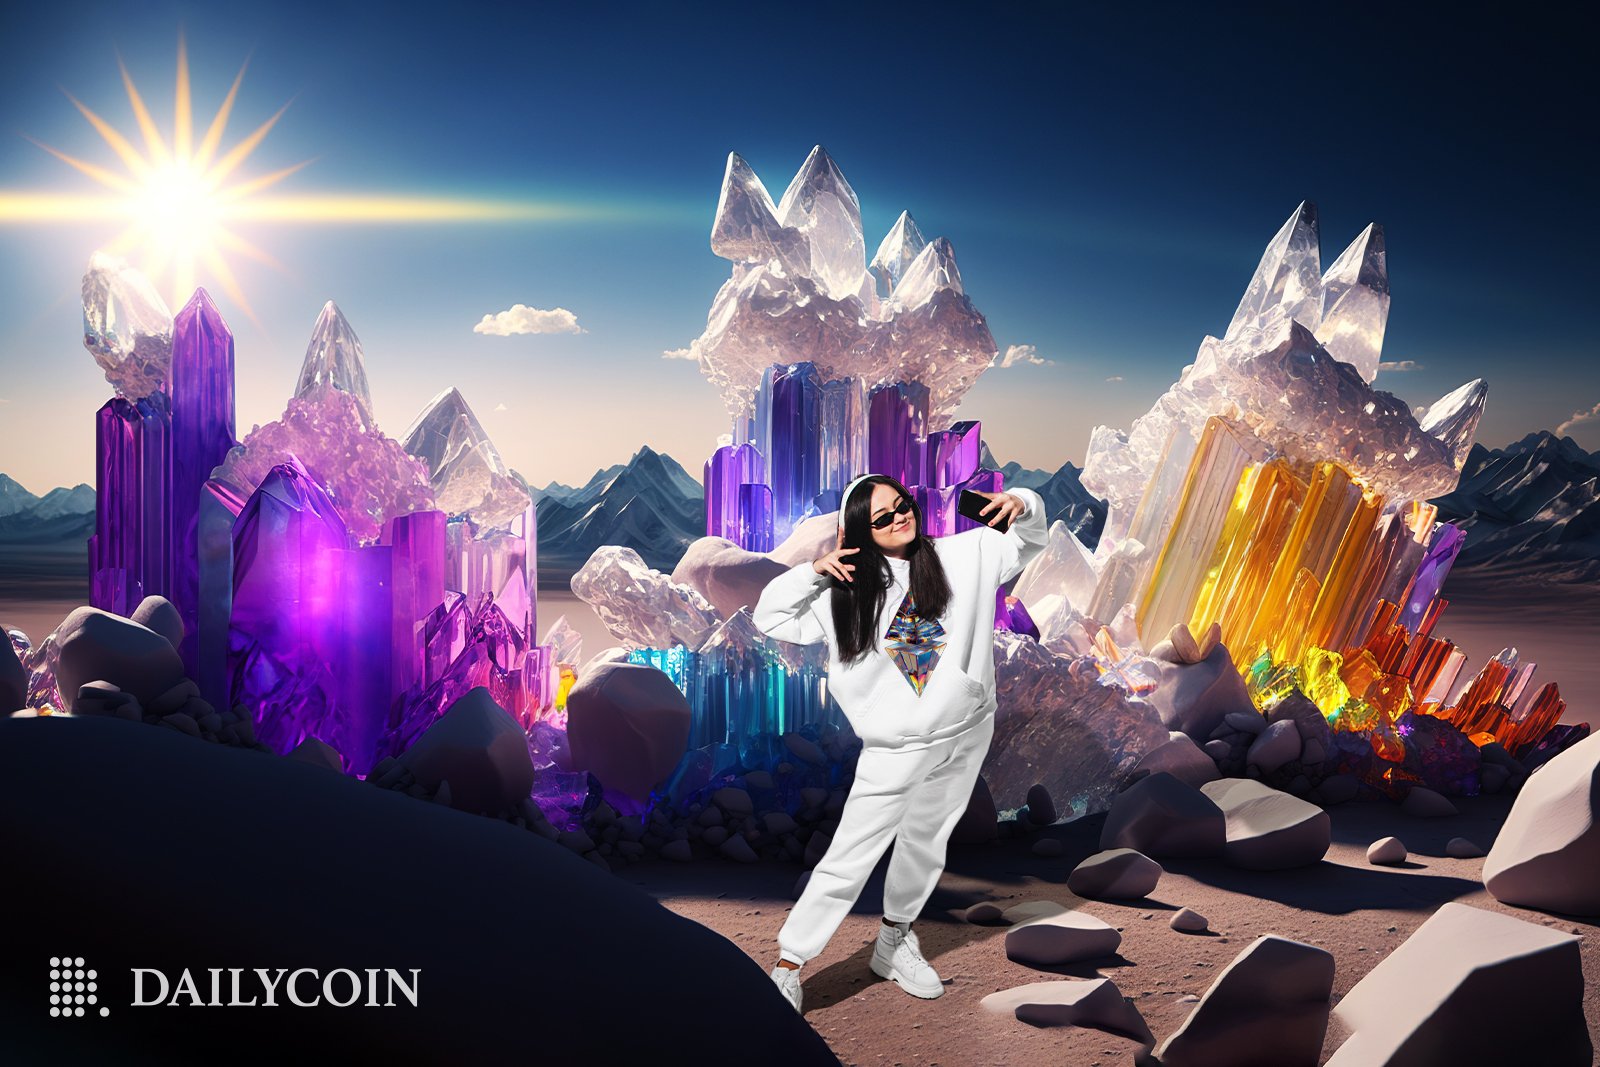 A girl in a white hoodie wearing sunglasses does a selfie in front of colorful gems.